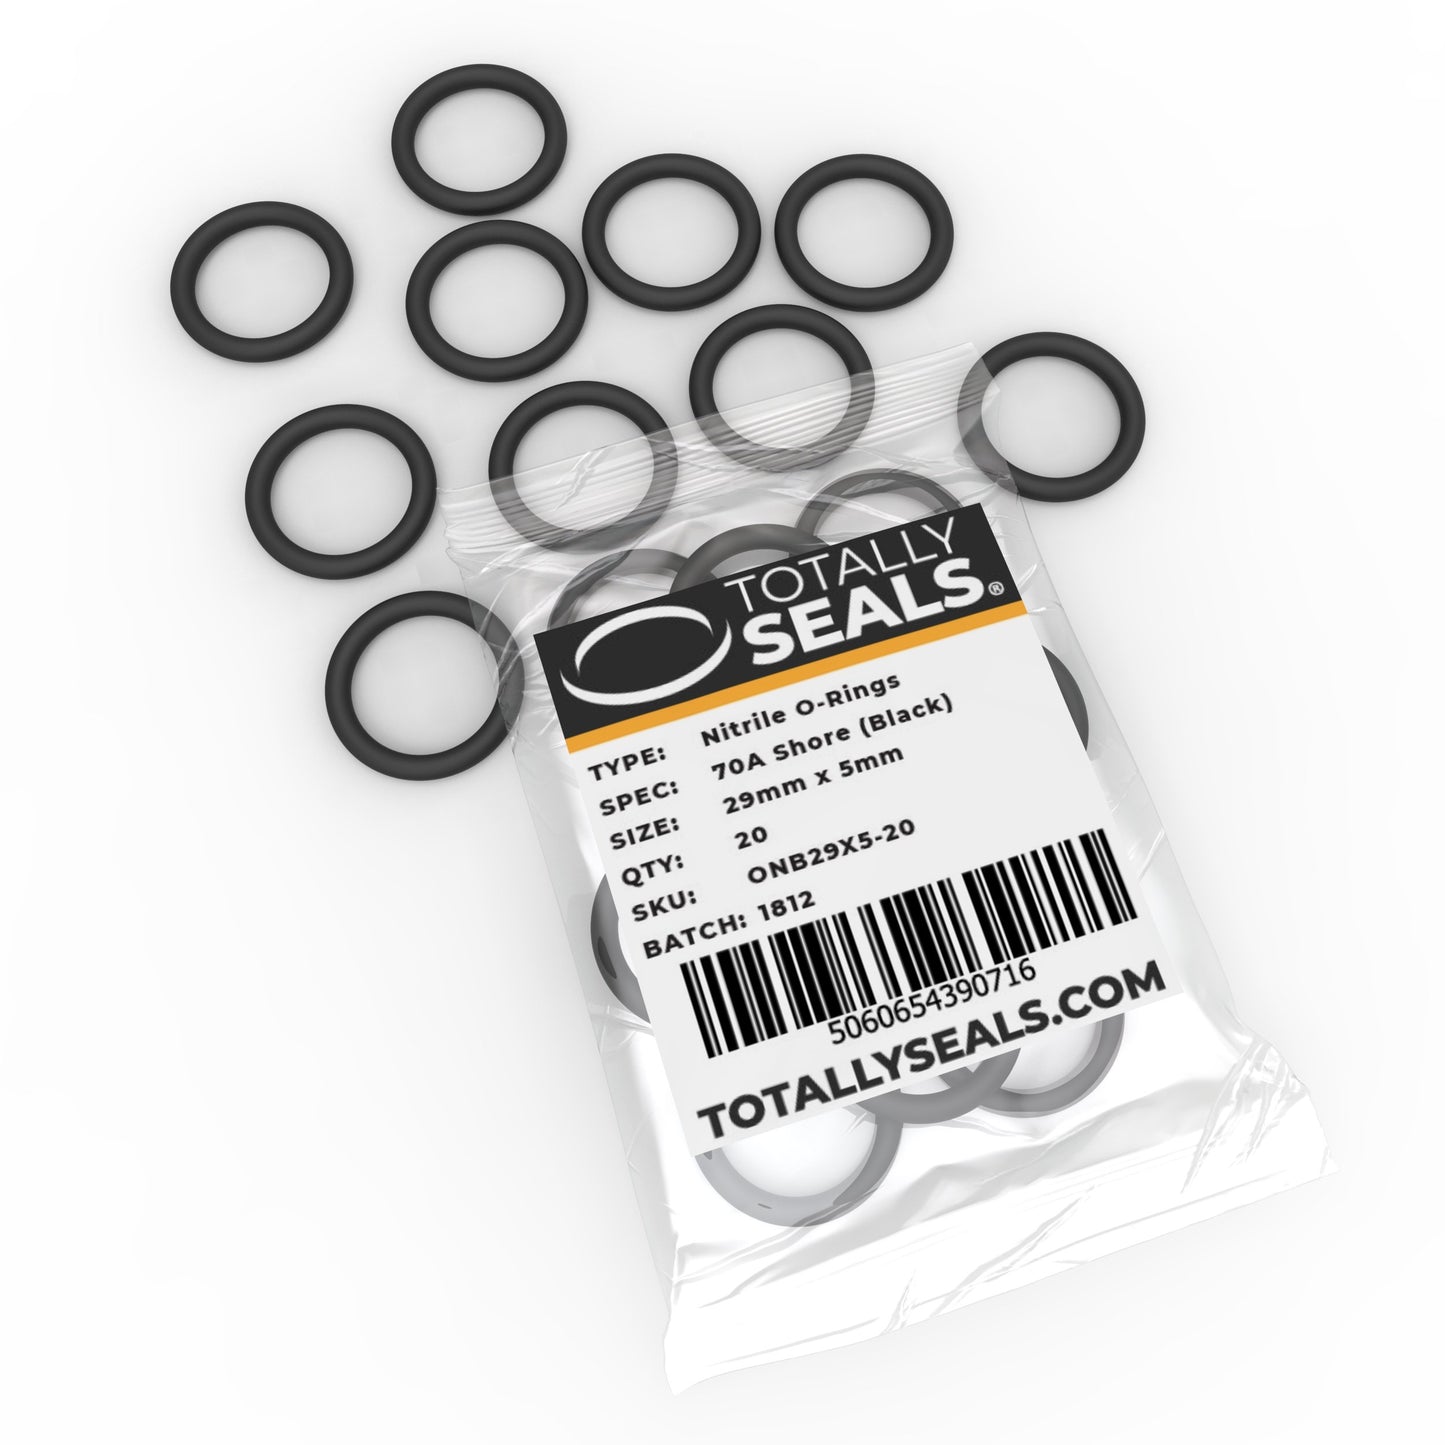 29mm x 5mm (39mm OD) Nitrile O-Rings - Totally Seals®